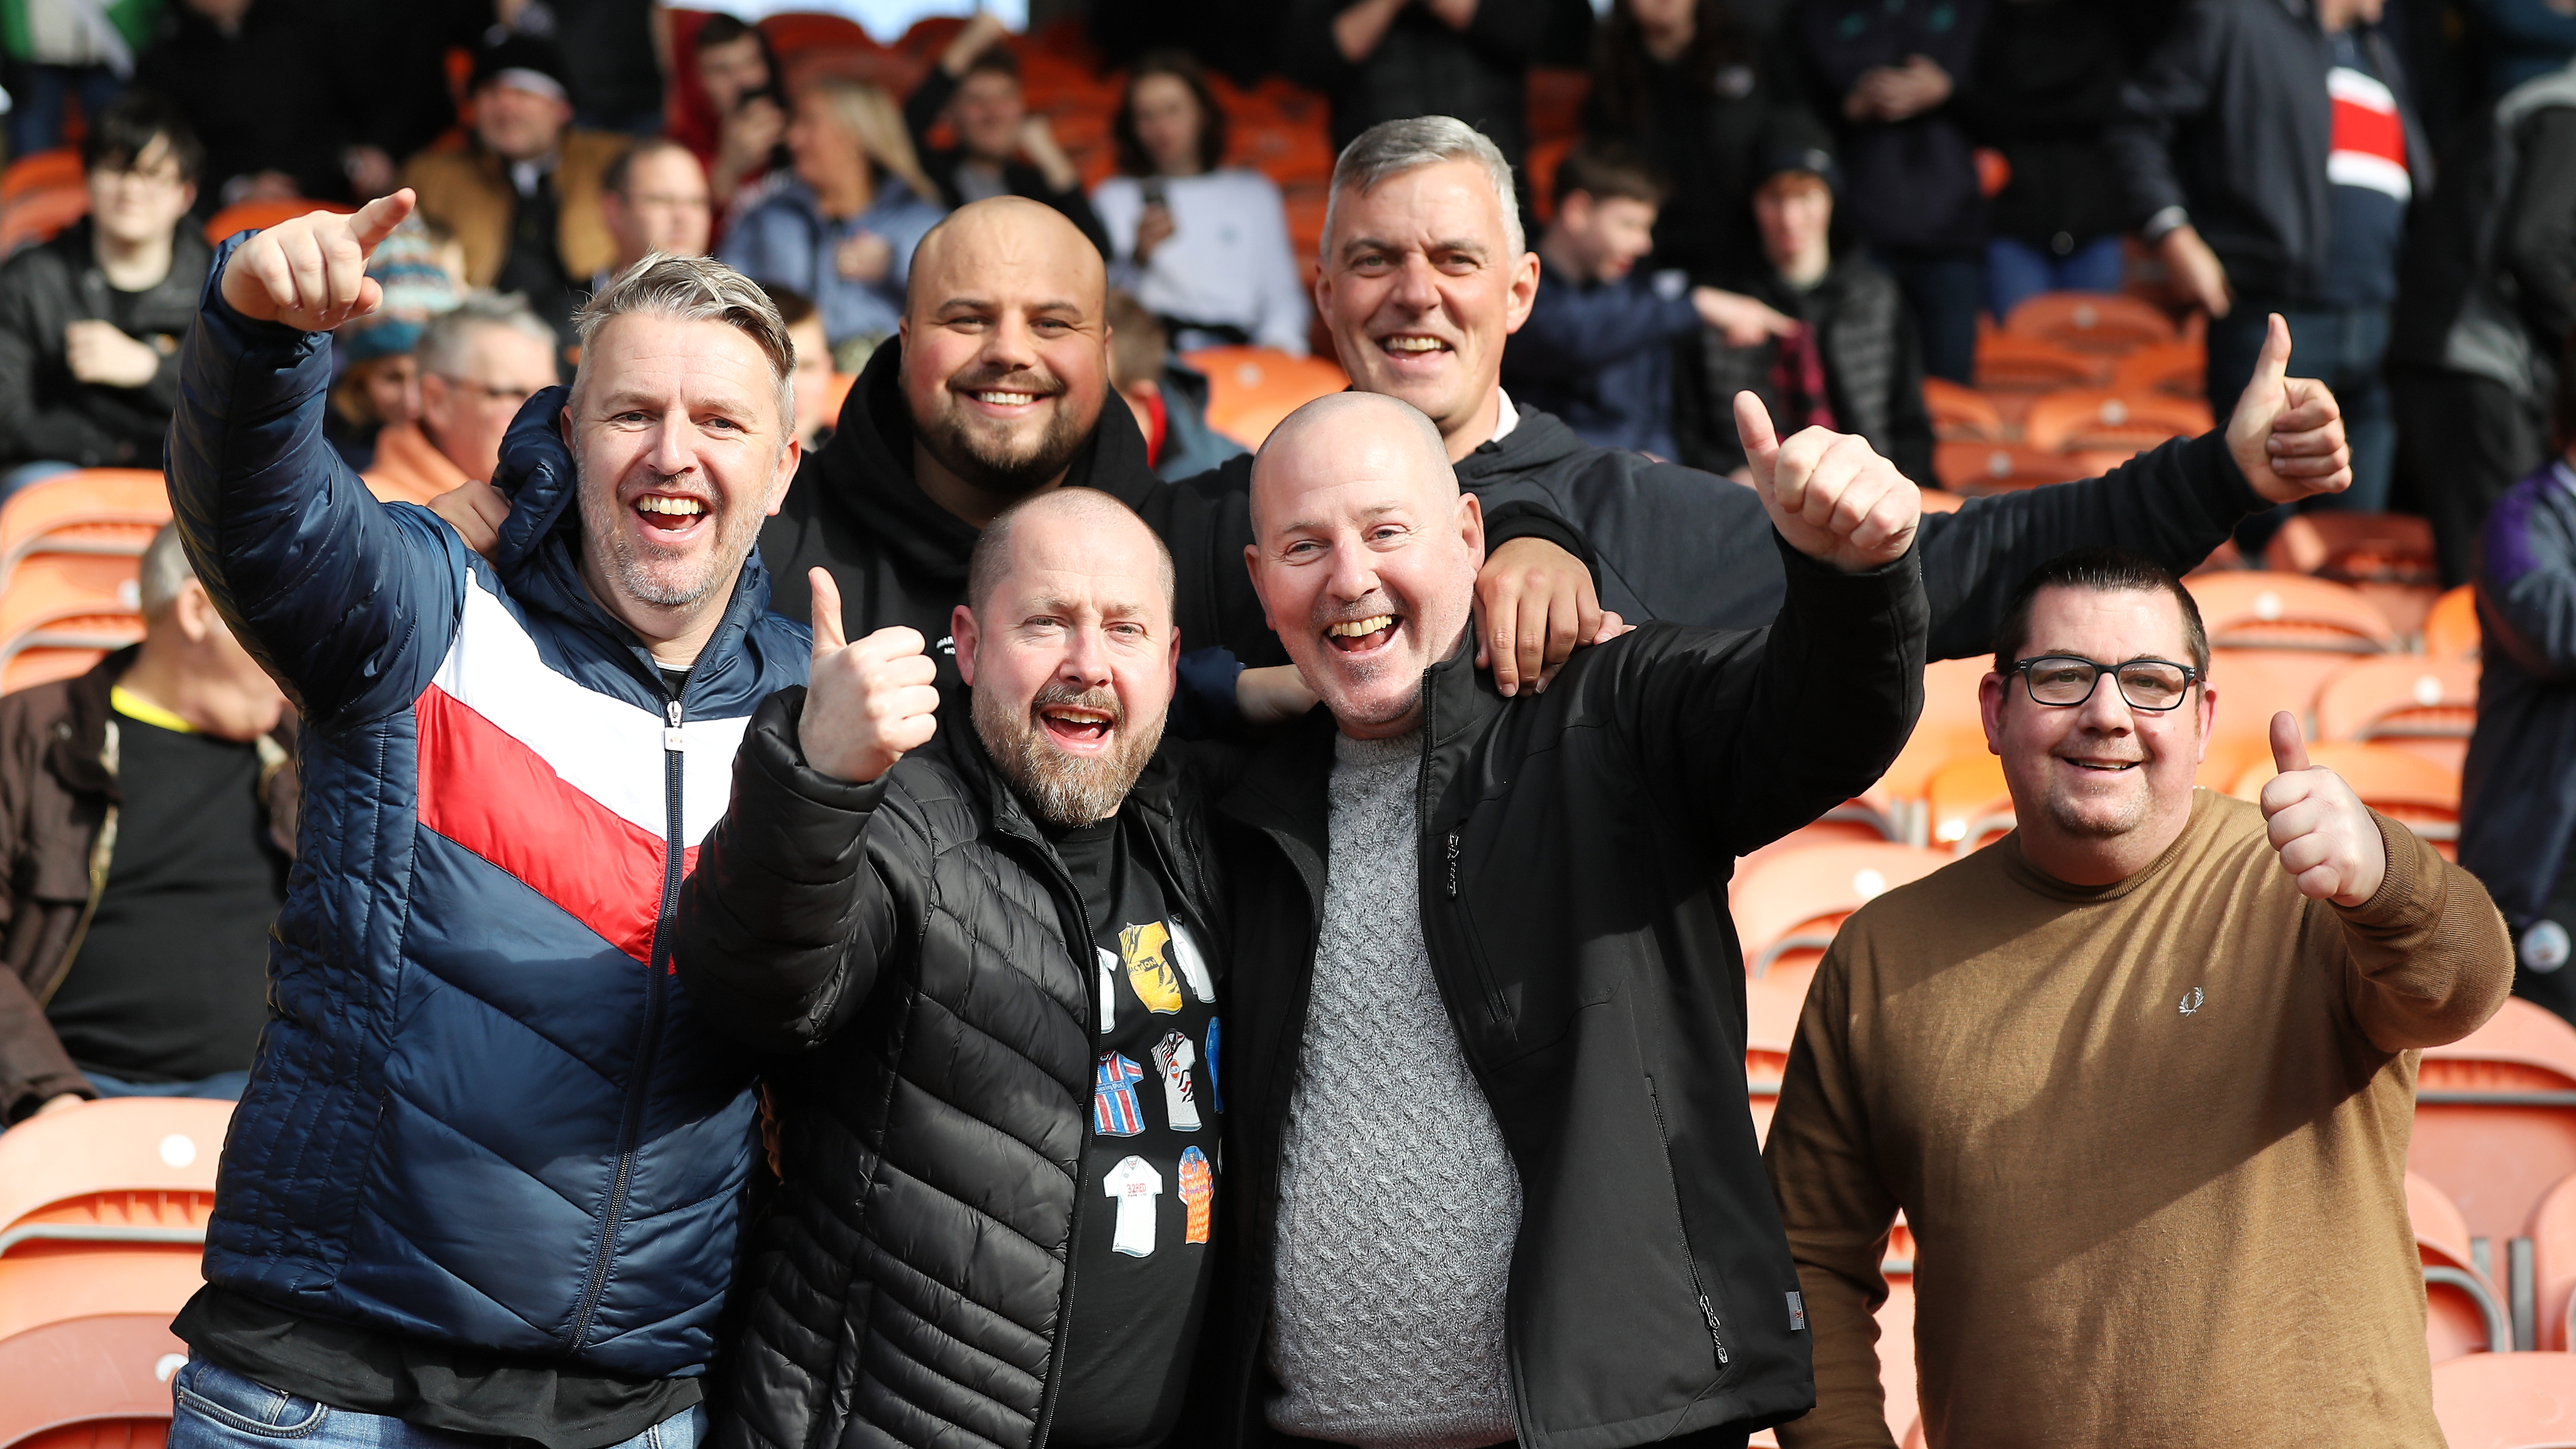 Blackpool (a) fans 21-22